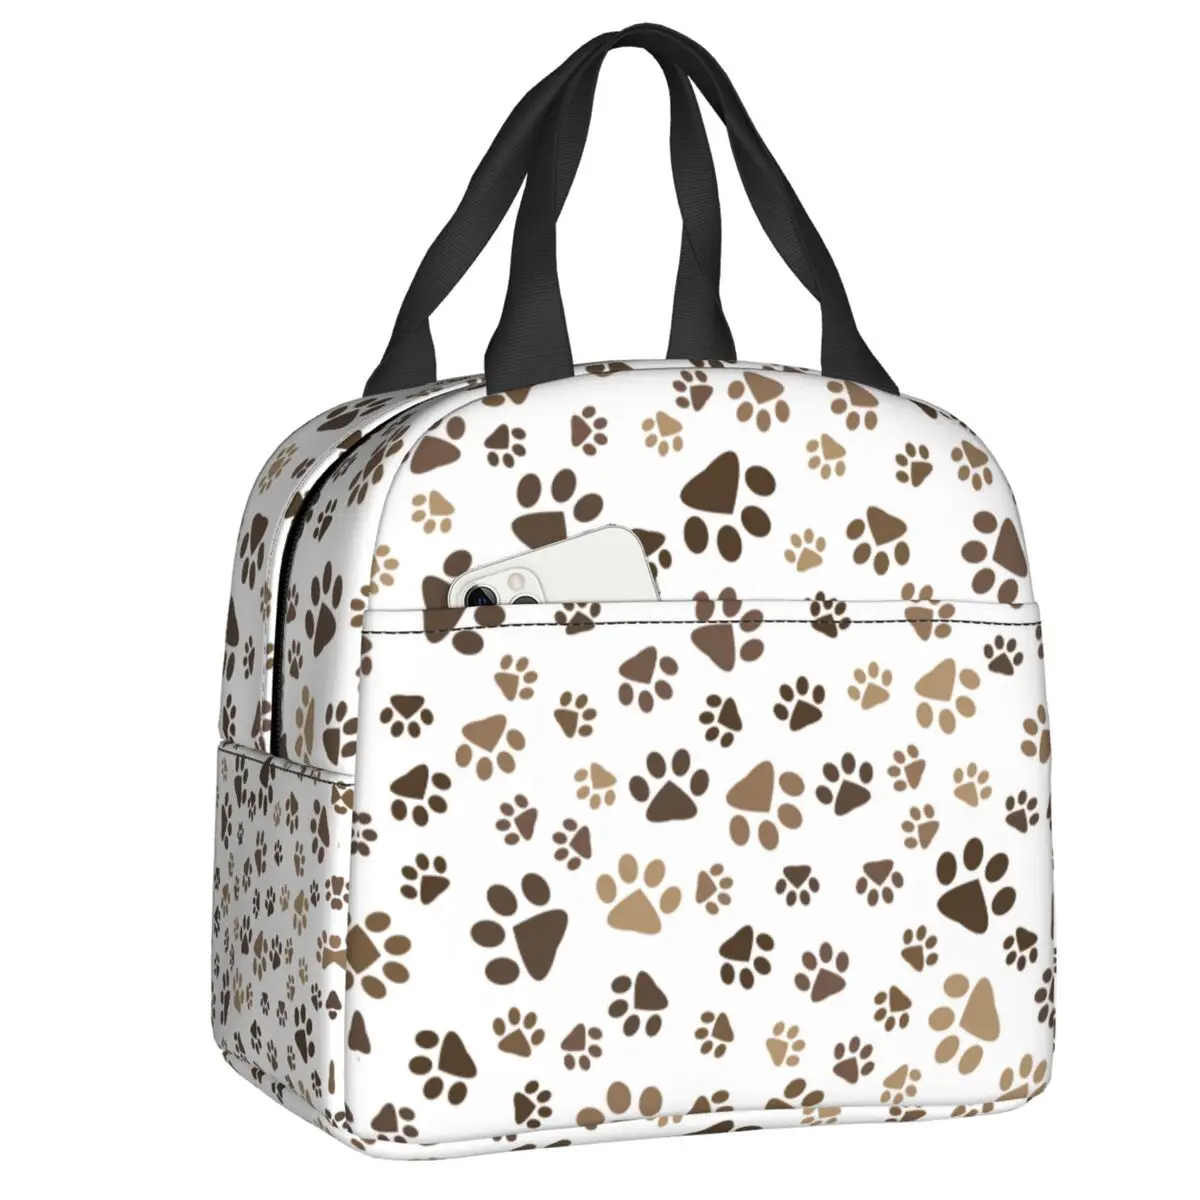 

Dog Footprints Insulated Lunch Bag for Women Resuable Cute Puppy Pet Paws Pattern Cooler Thermal Lunch Tote Beach Camping Travel